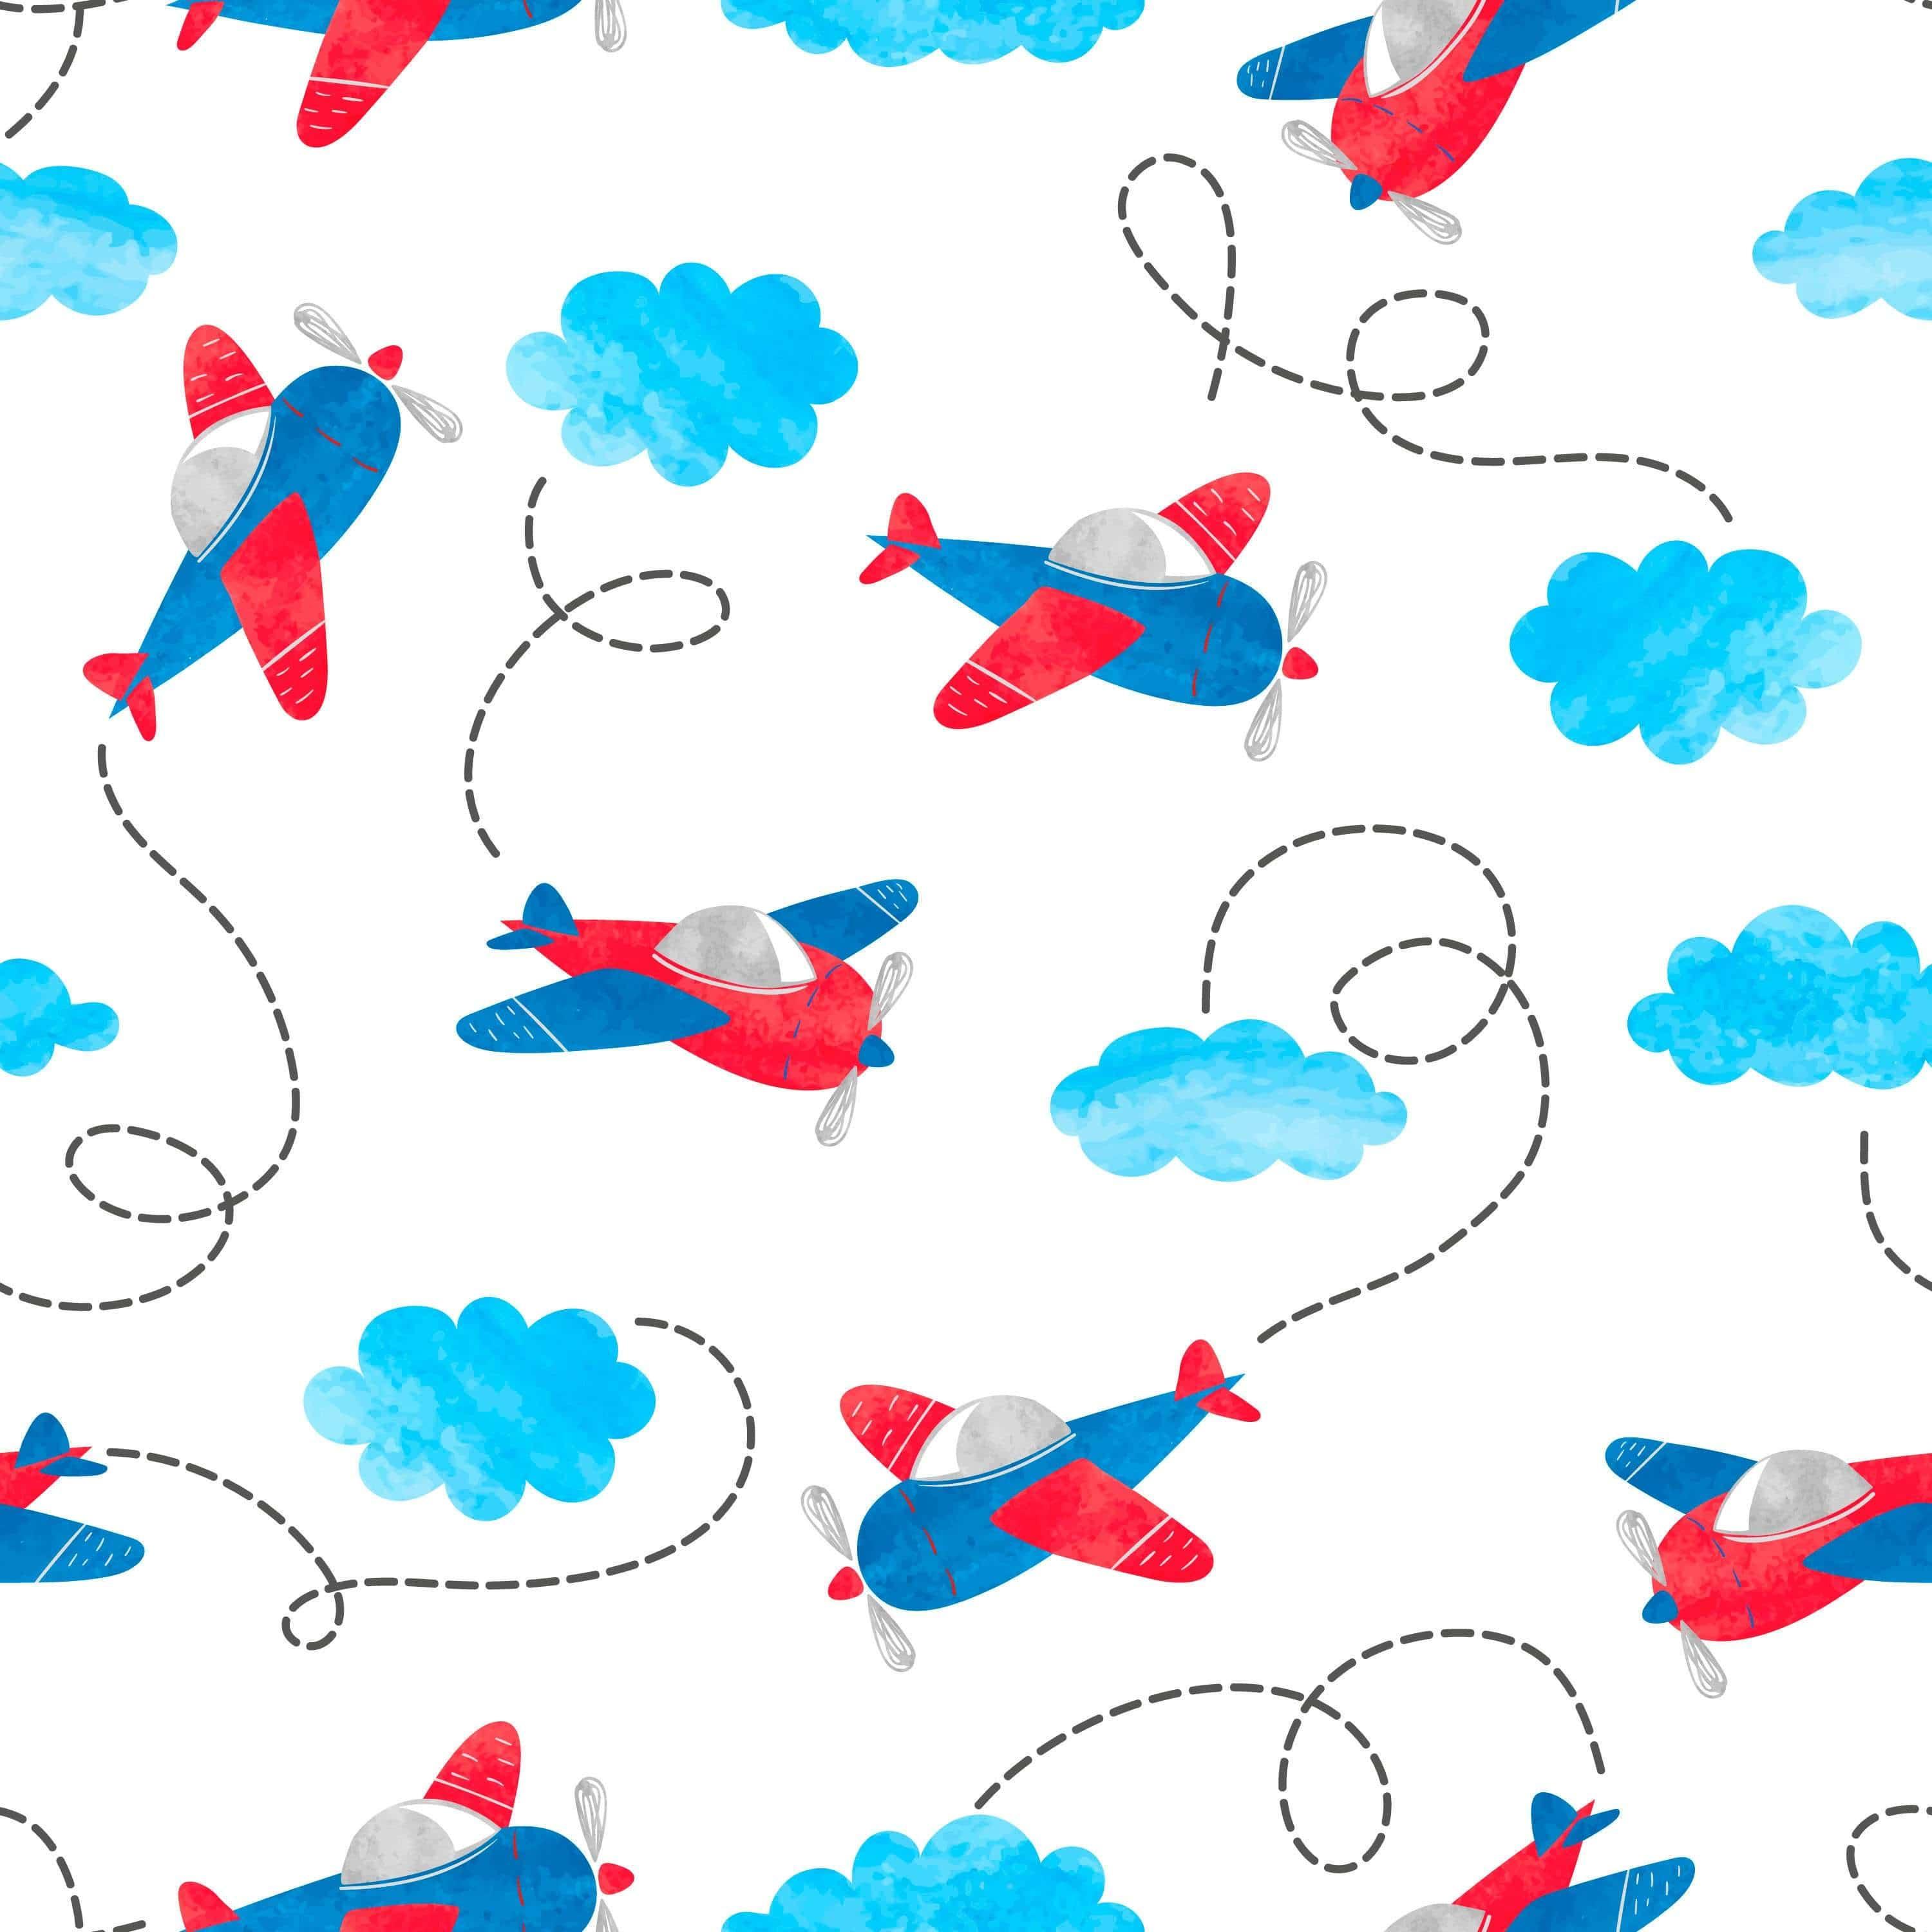 Helicopter Twirling in Clouds Removable Wallpaper in 28" Rolls